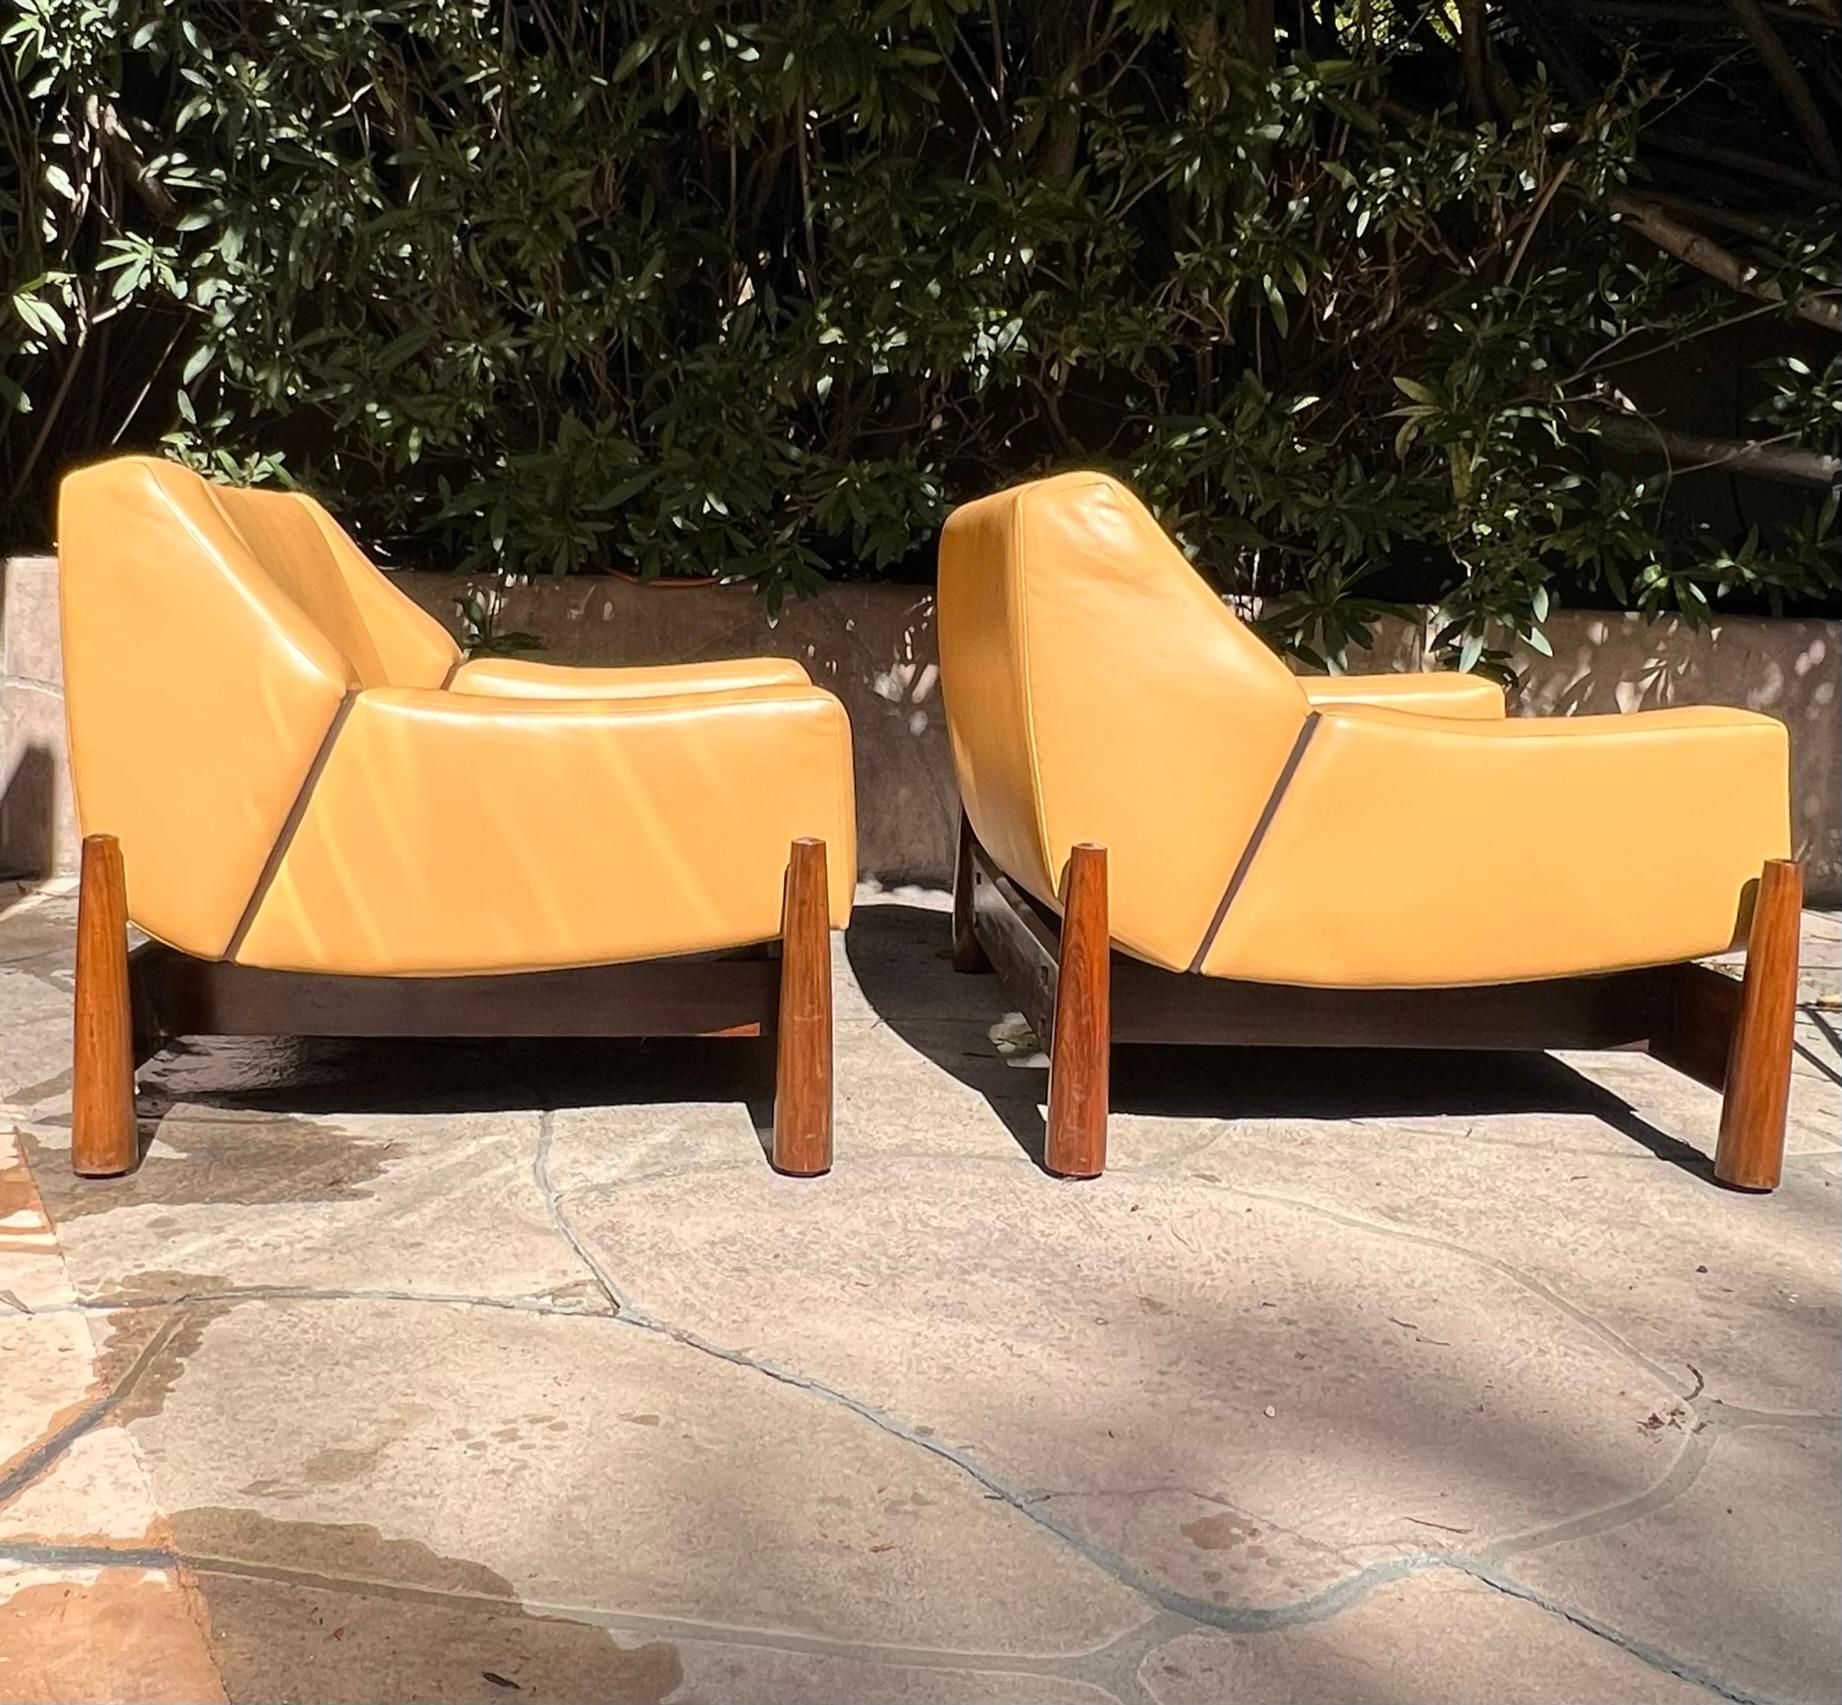 Leather Brazilian Modernist Club Chairs by Móveis Cimo, a Pair, circa 1950s For Sale